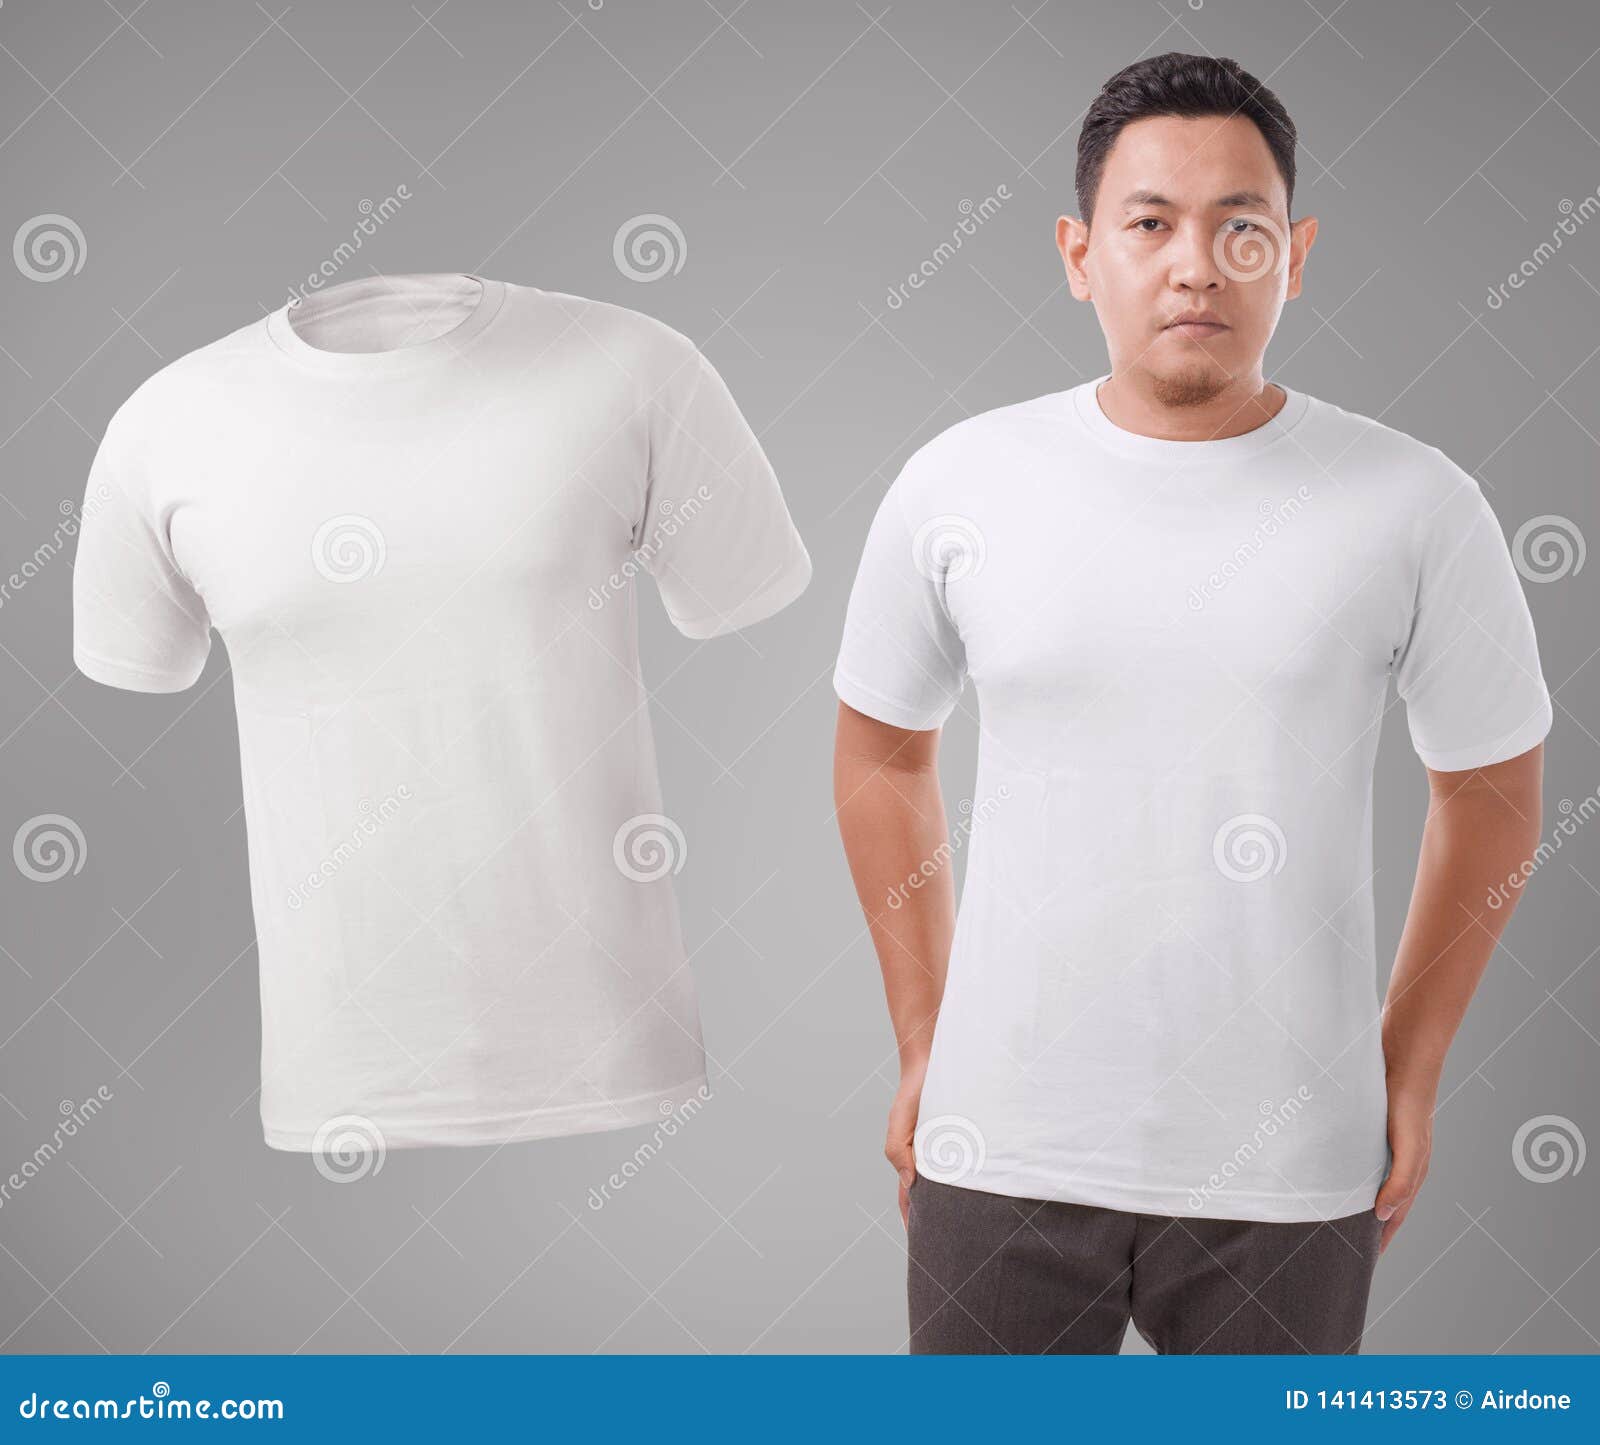 White Shirt Design Template Stock Image - Image of back, cotton: 141413573